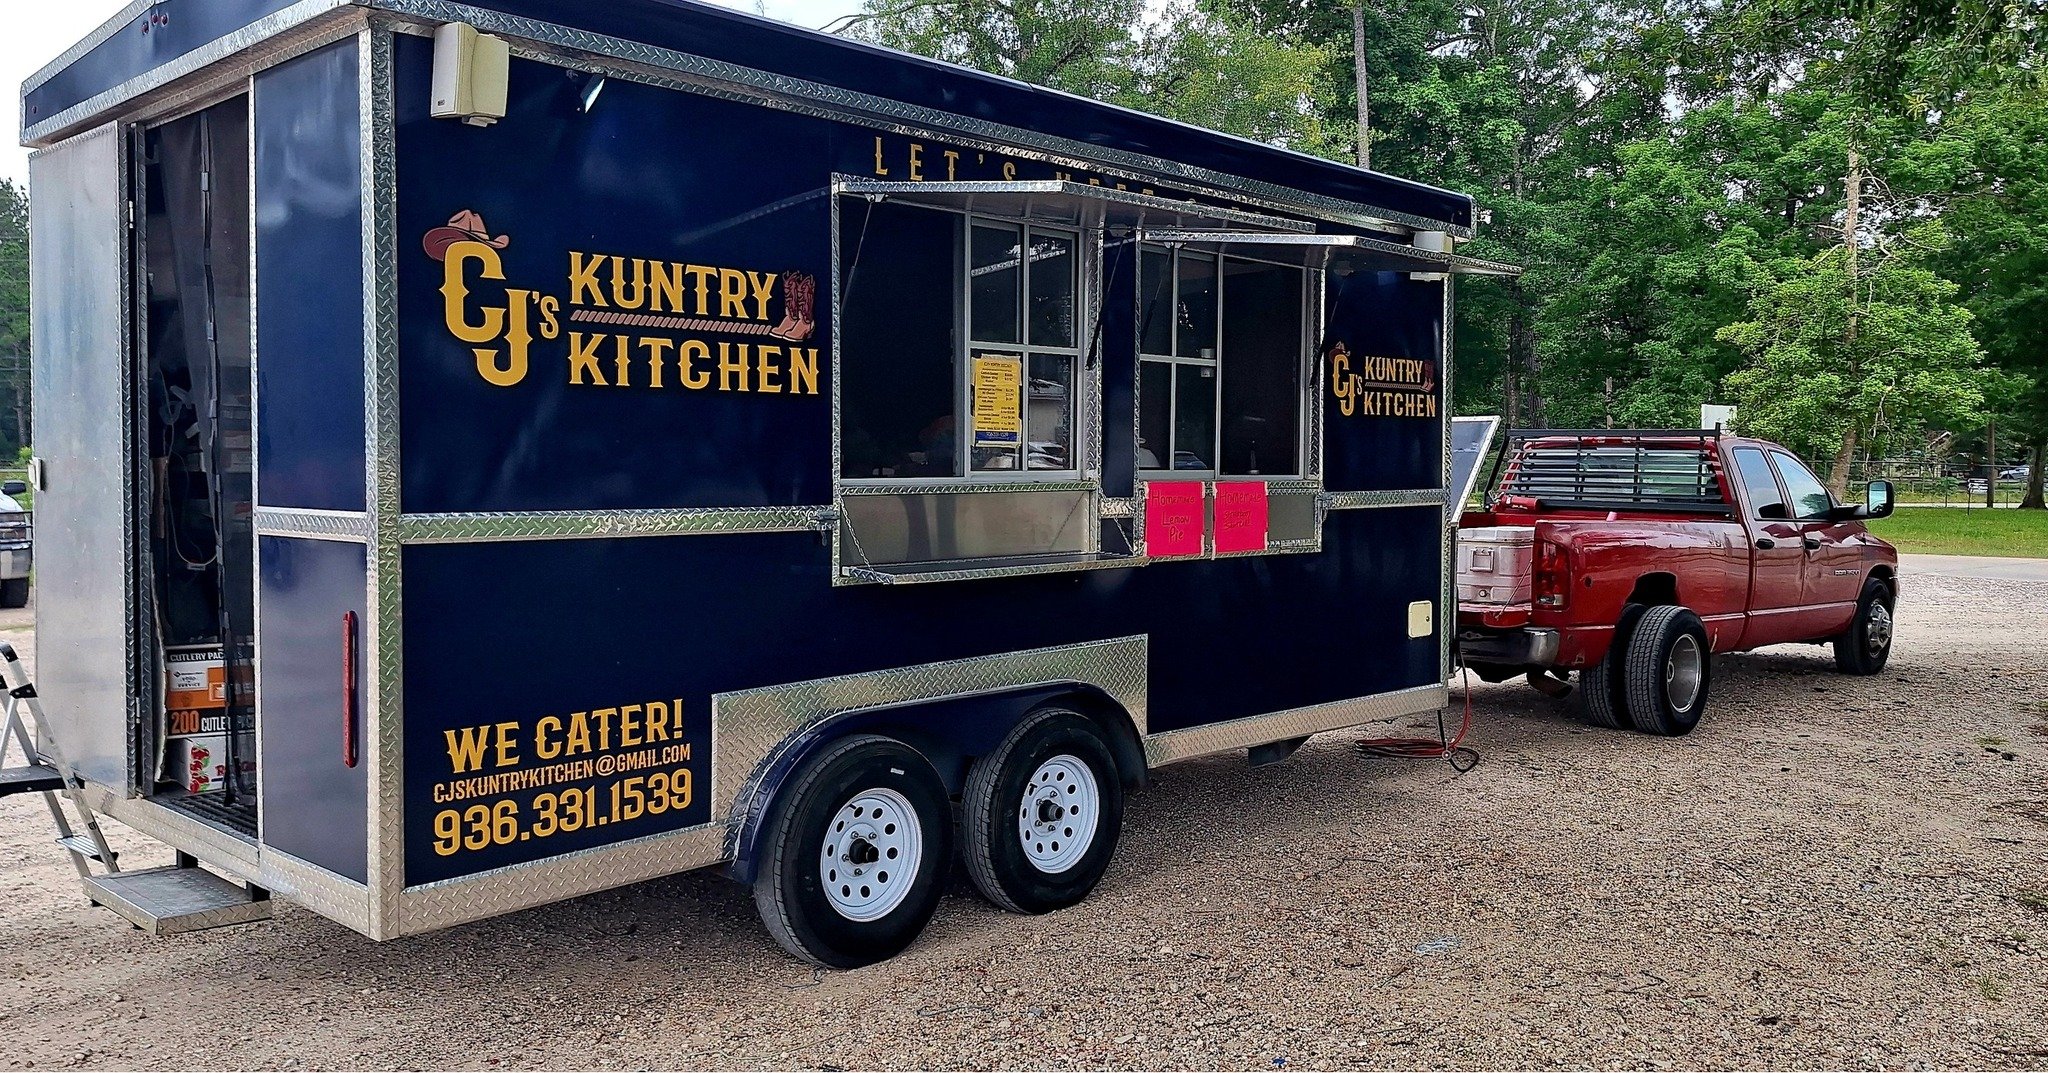 Our taste buds are still buzzing after CJ's Kuntry Kitchen stopped by Bakers' Signs today!🤤 Thanks for the amazing food!

Thank you again for stopping by and making our day extra special.😊

#CJsKuntryKitchen #BakersSigns 

CJ'S Kuntry Kitchen